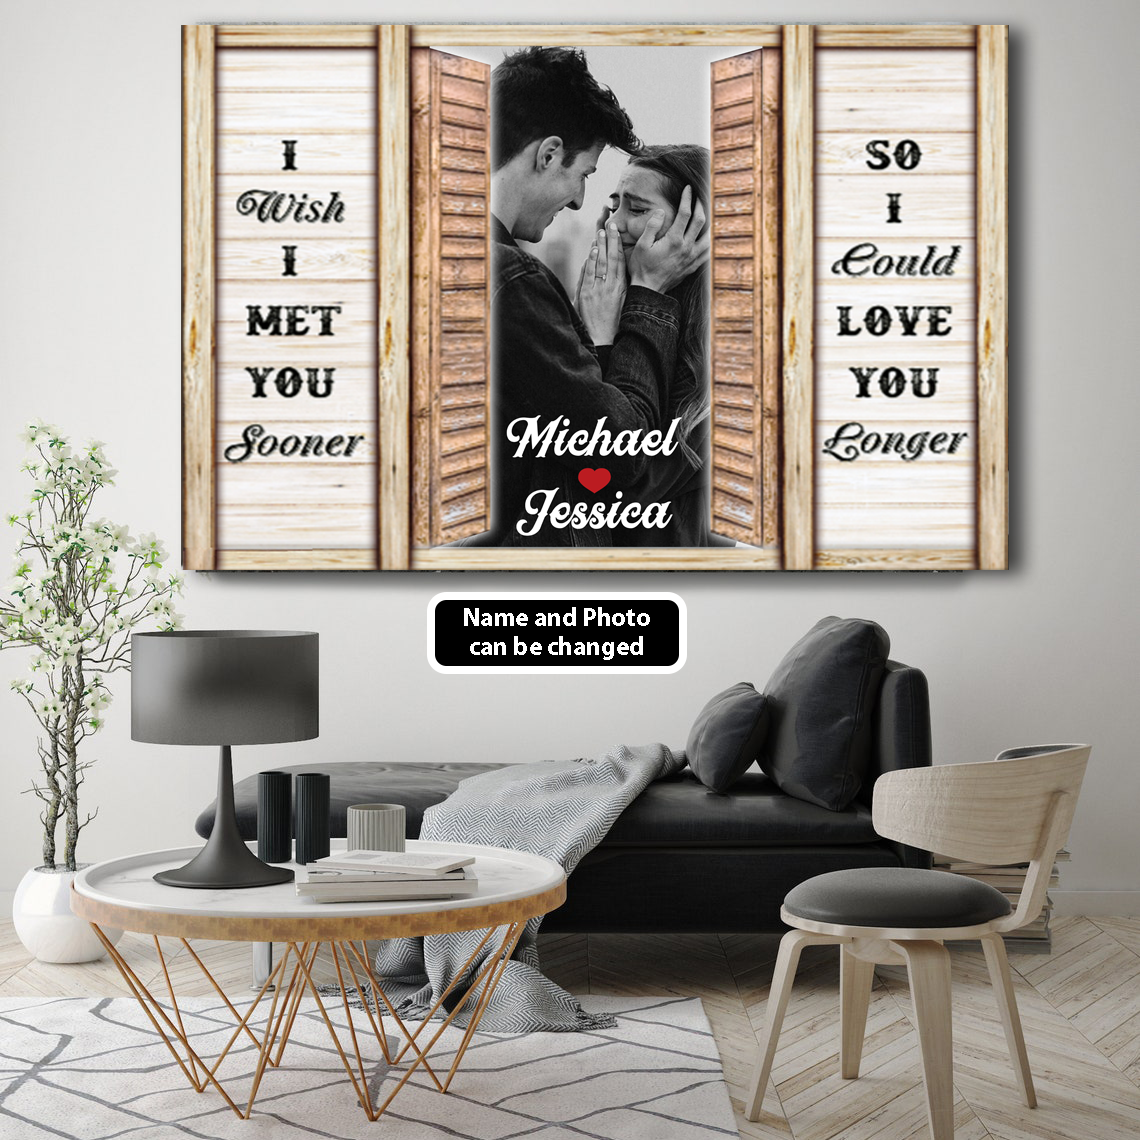 PresentsPrints, Met You sooner and Love you longer Personalized Canvas, Weeding Gift, Valentine Gift, Anniversary Gift For Her for Him